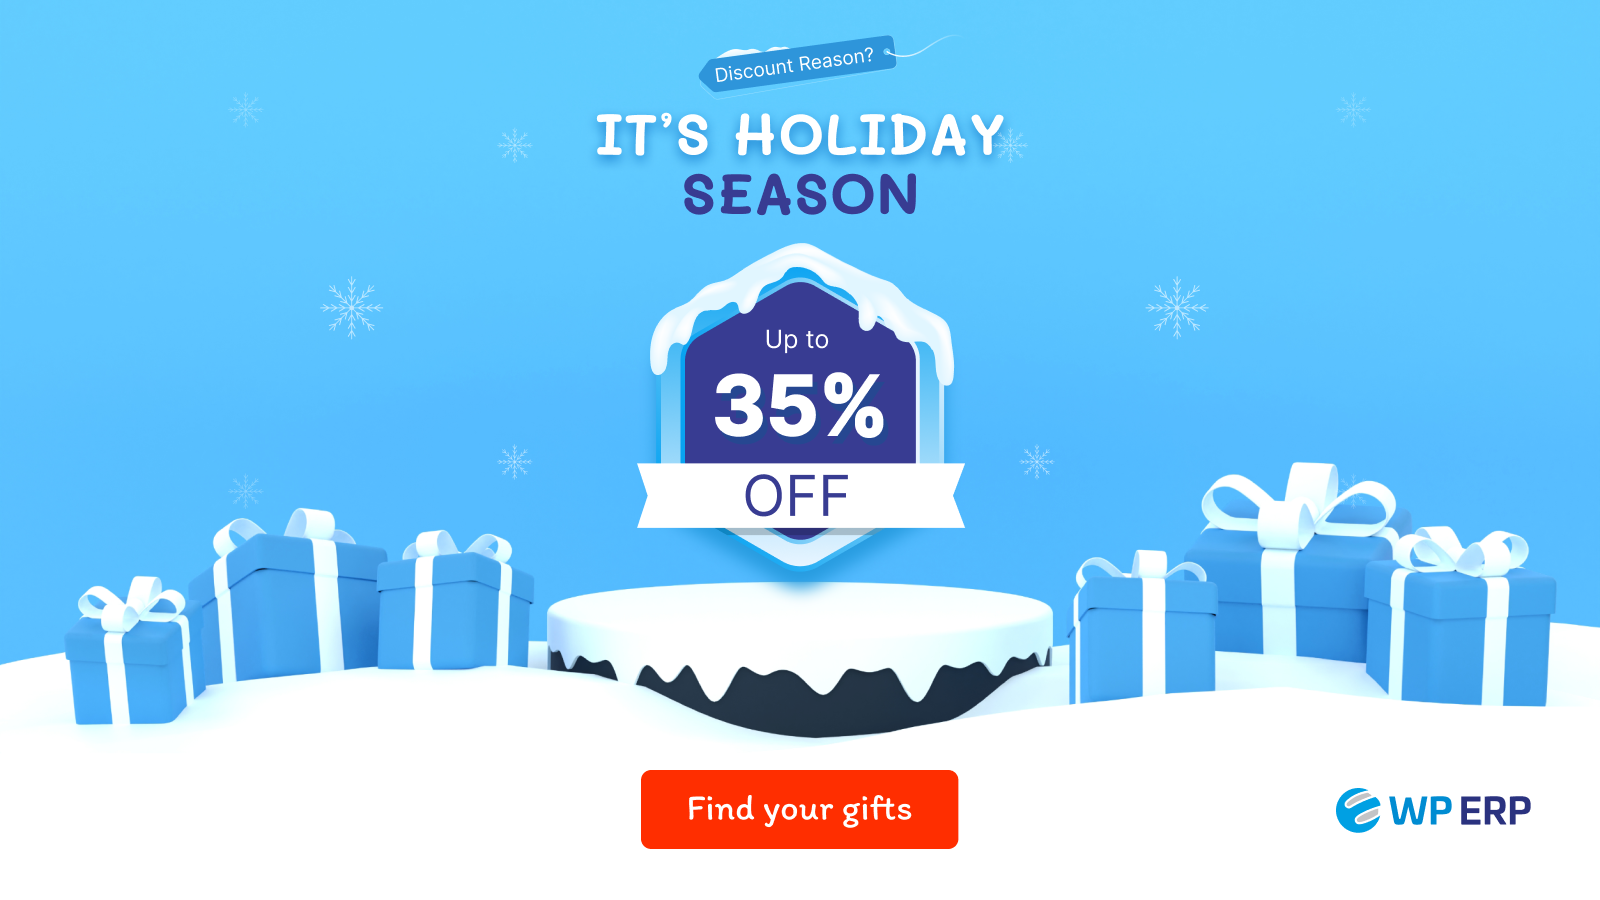 WP ERP holiday deals